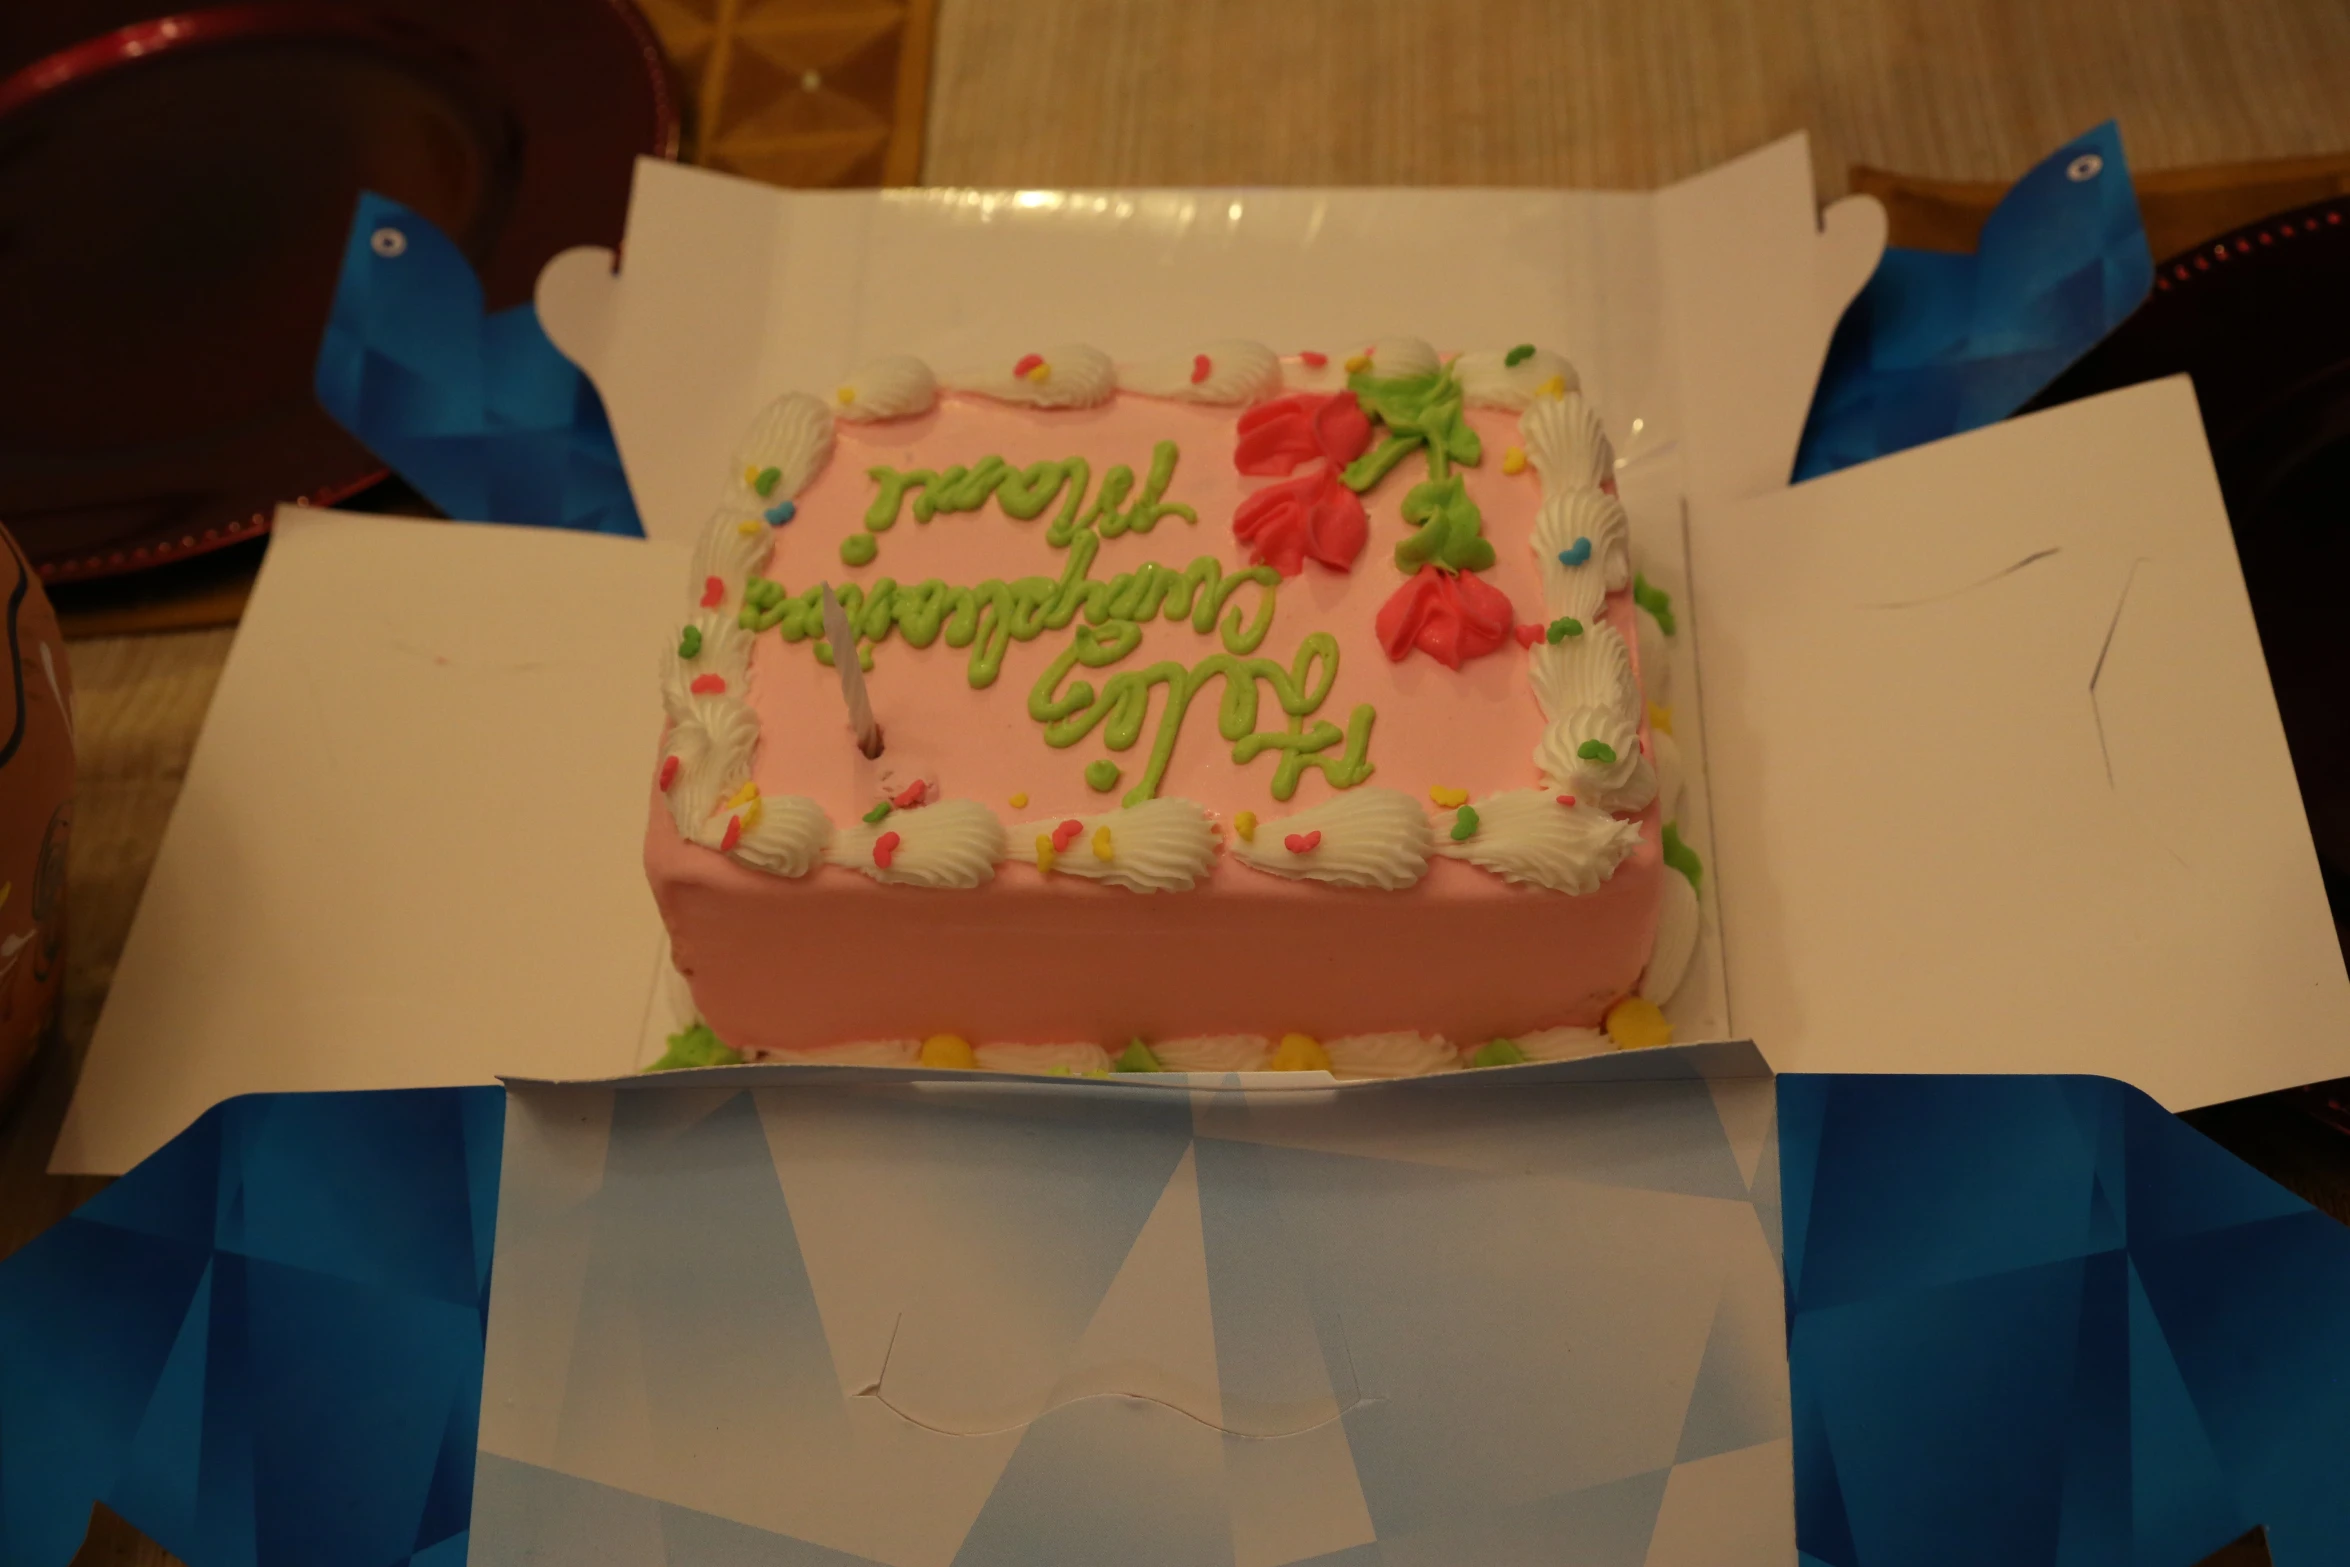 a decorated birthday cake in a box on a table